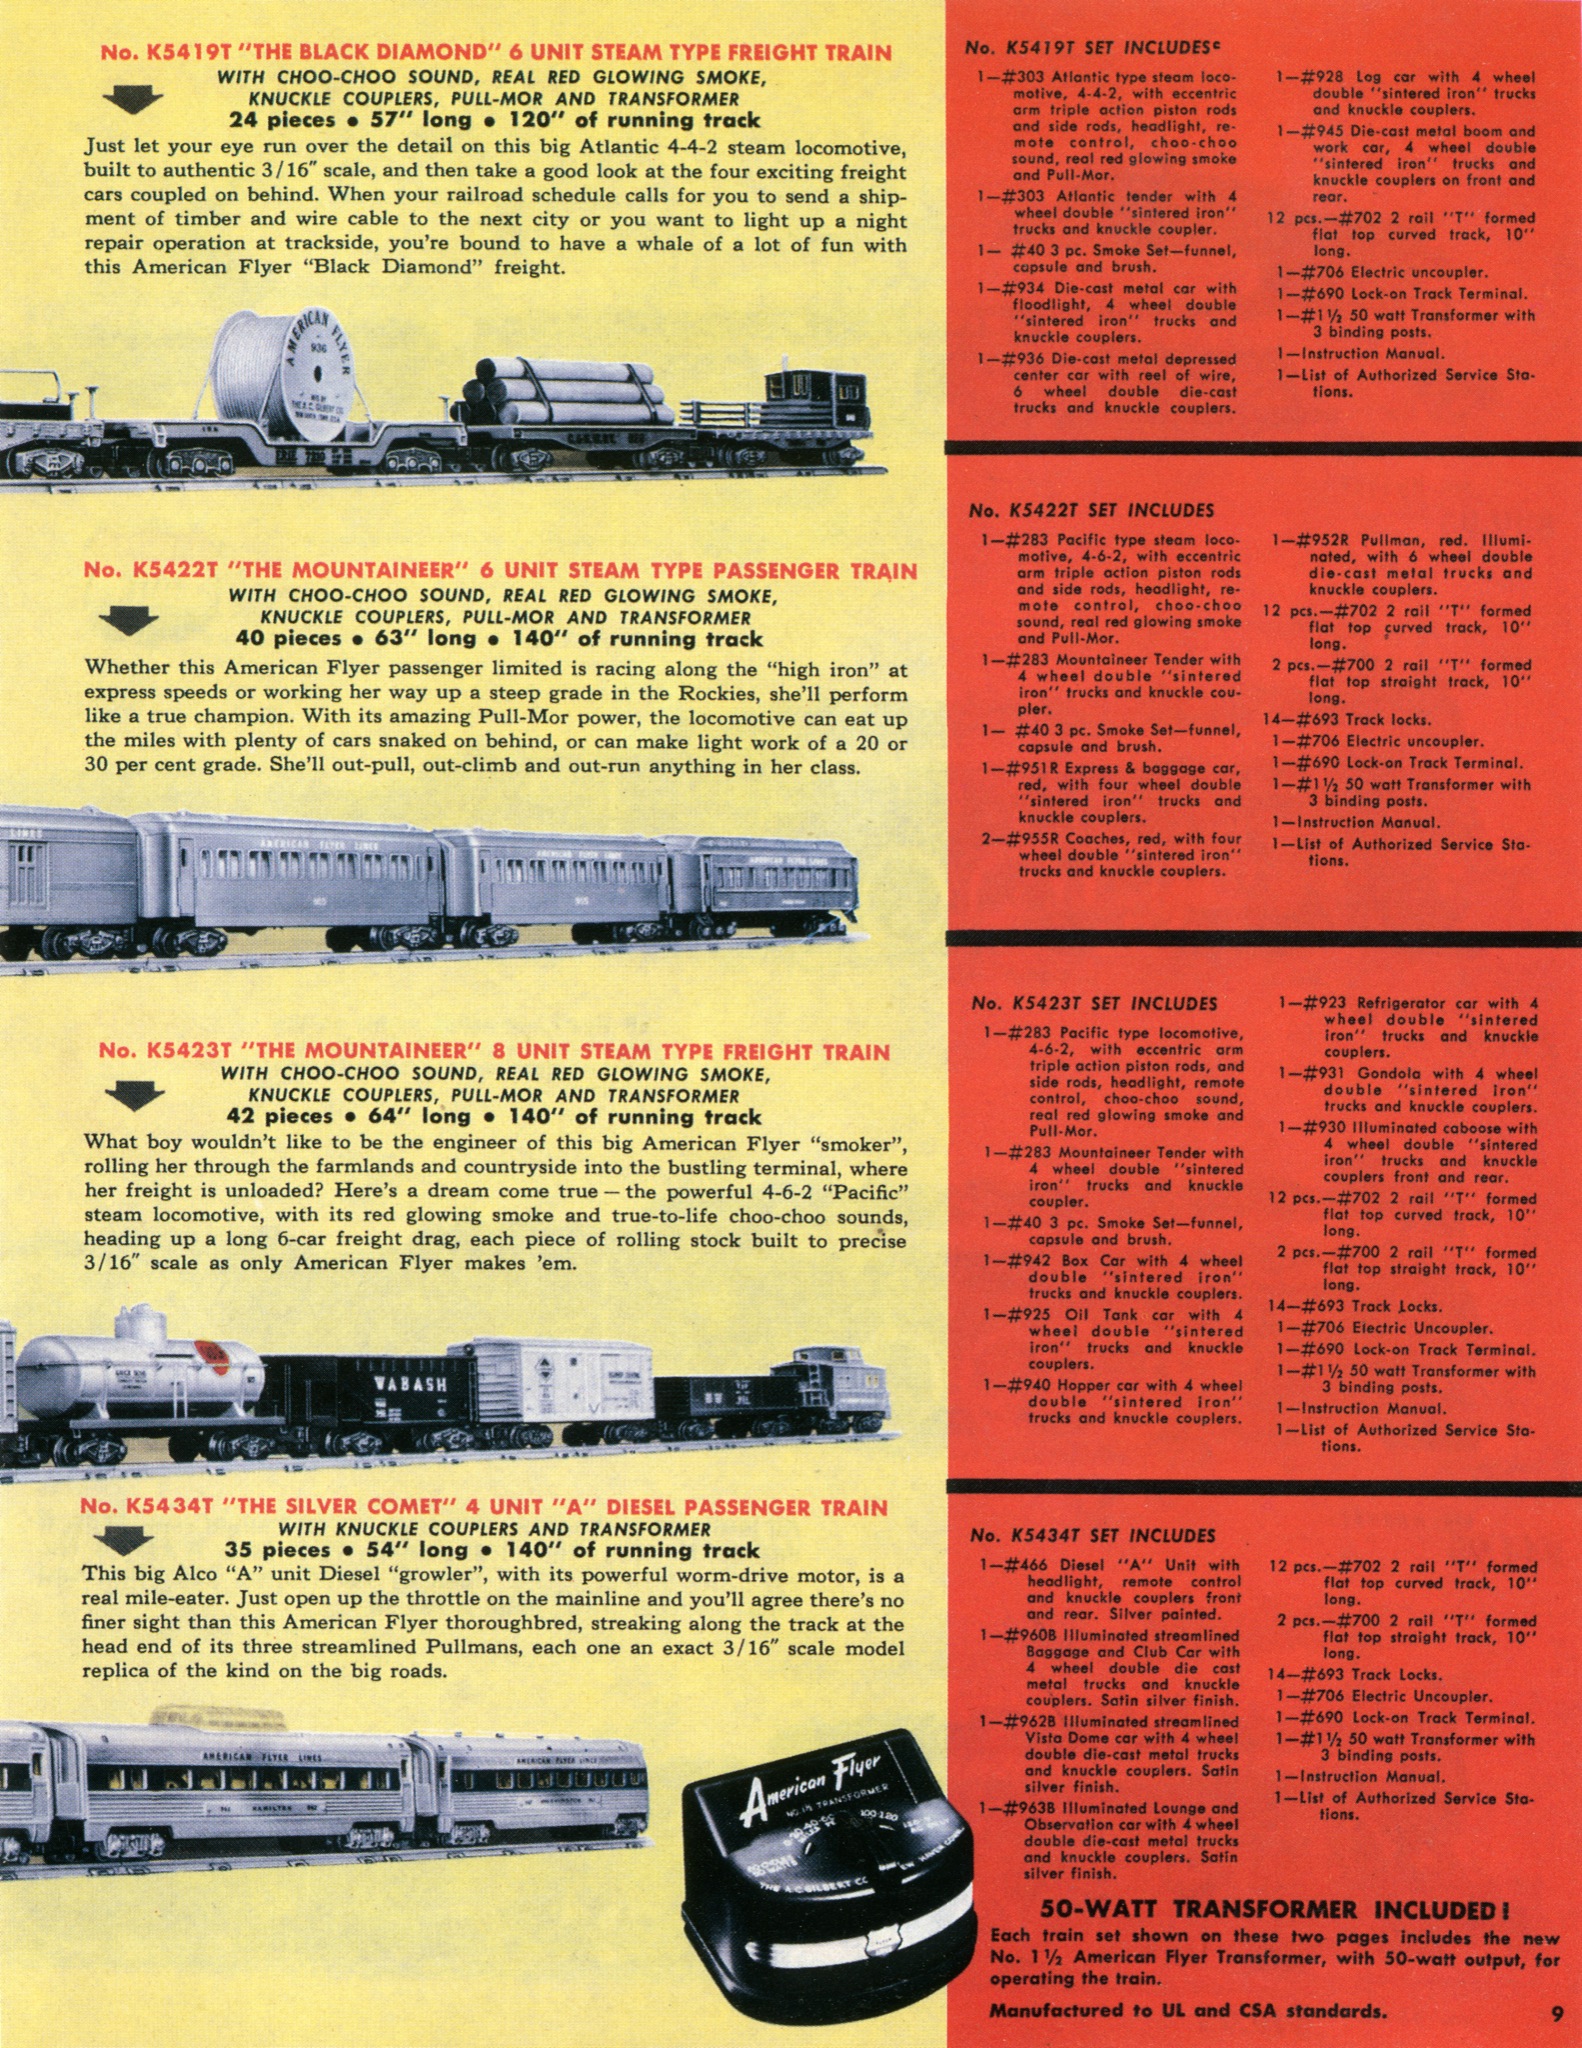 American Flyer No D2310 Consumer Catalog World of Transportation 36 Pages 